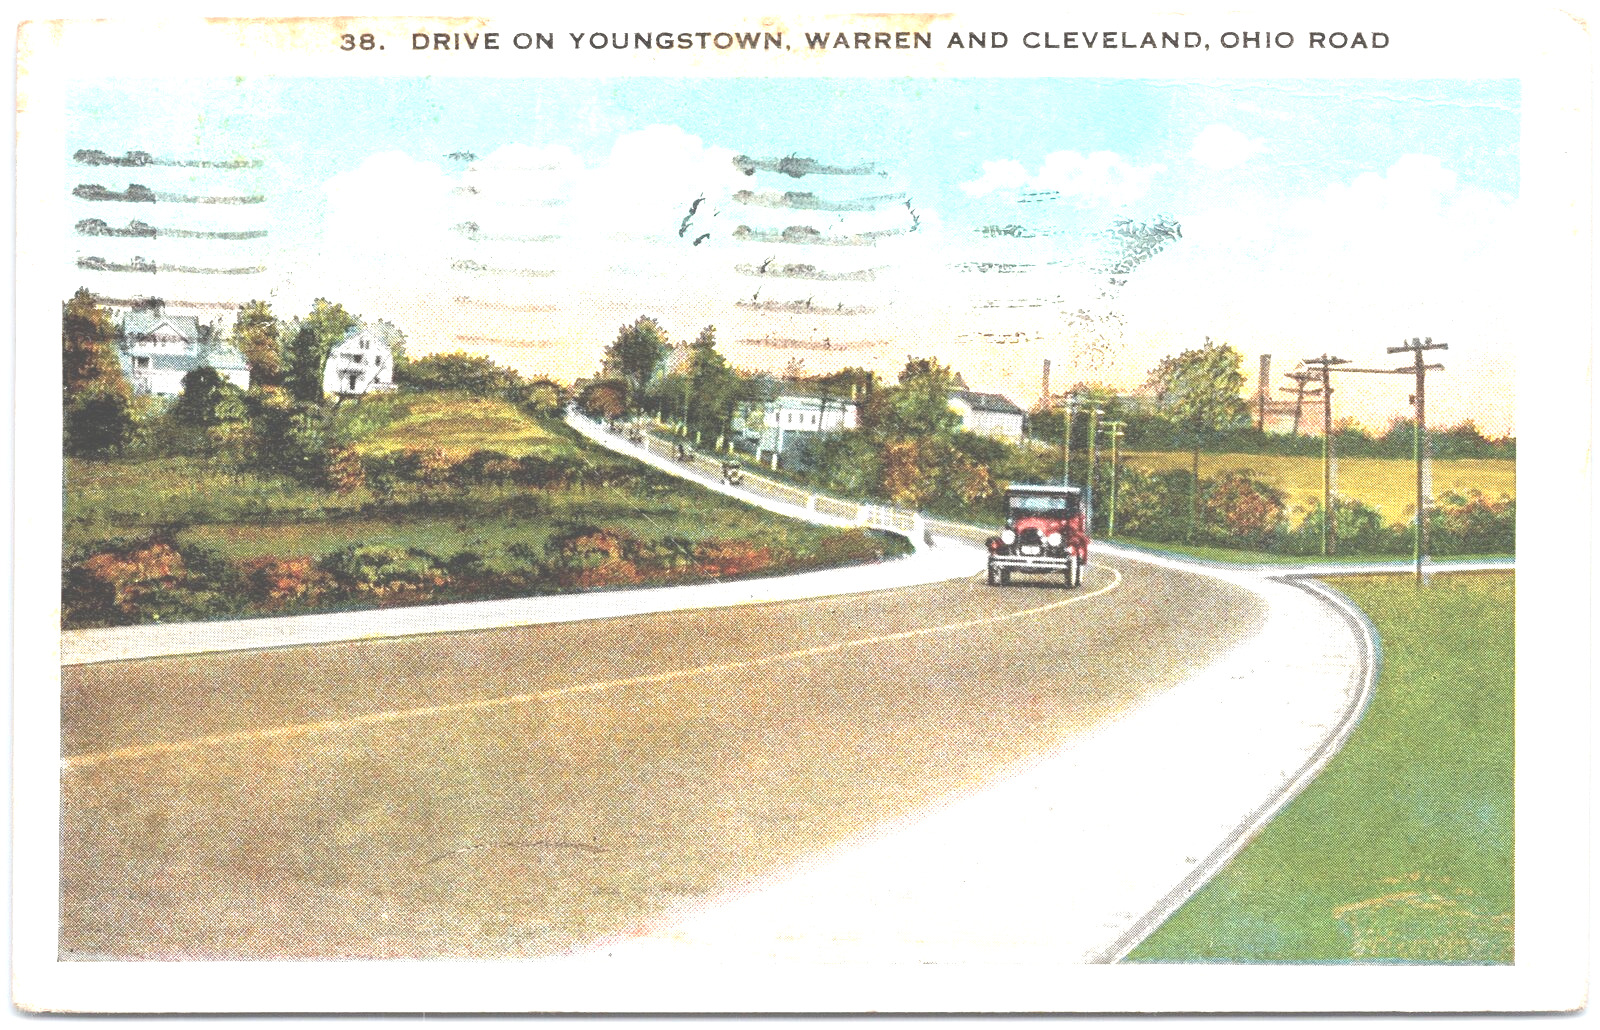 VINTAGE POSTCARD 1915 VIEW OF THE DRIVE ON YOUNGSTOWN WARREN AND CLEVELAND